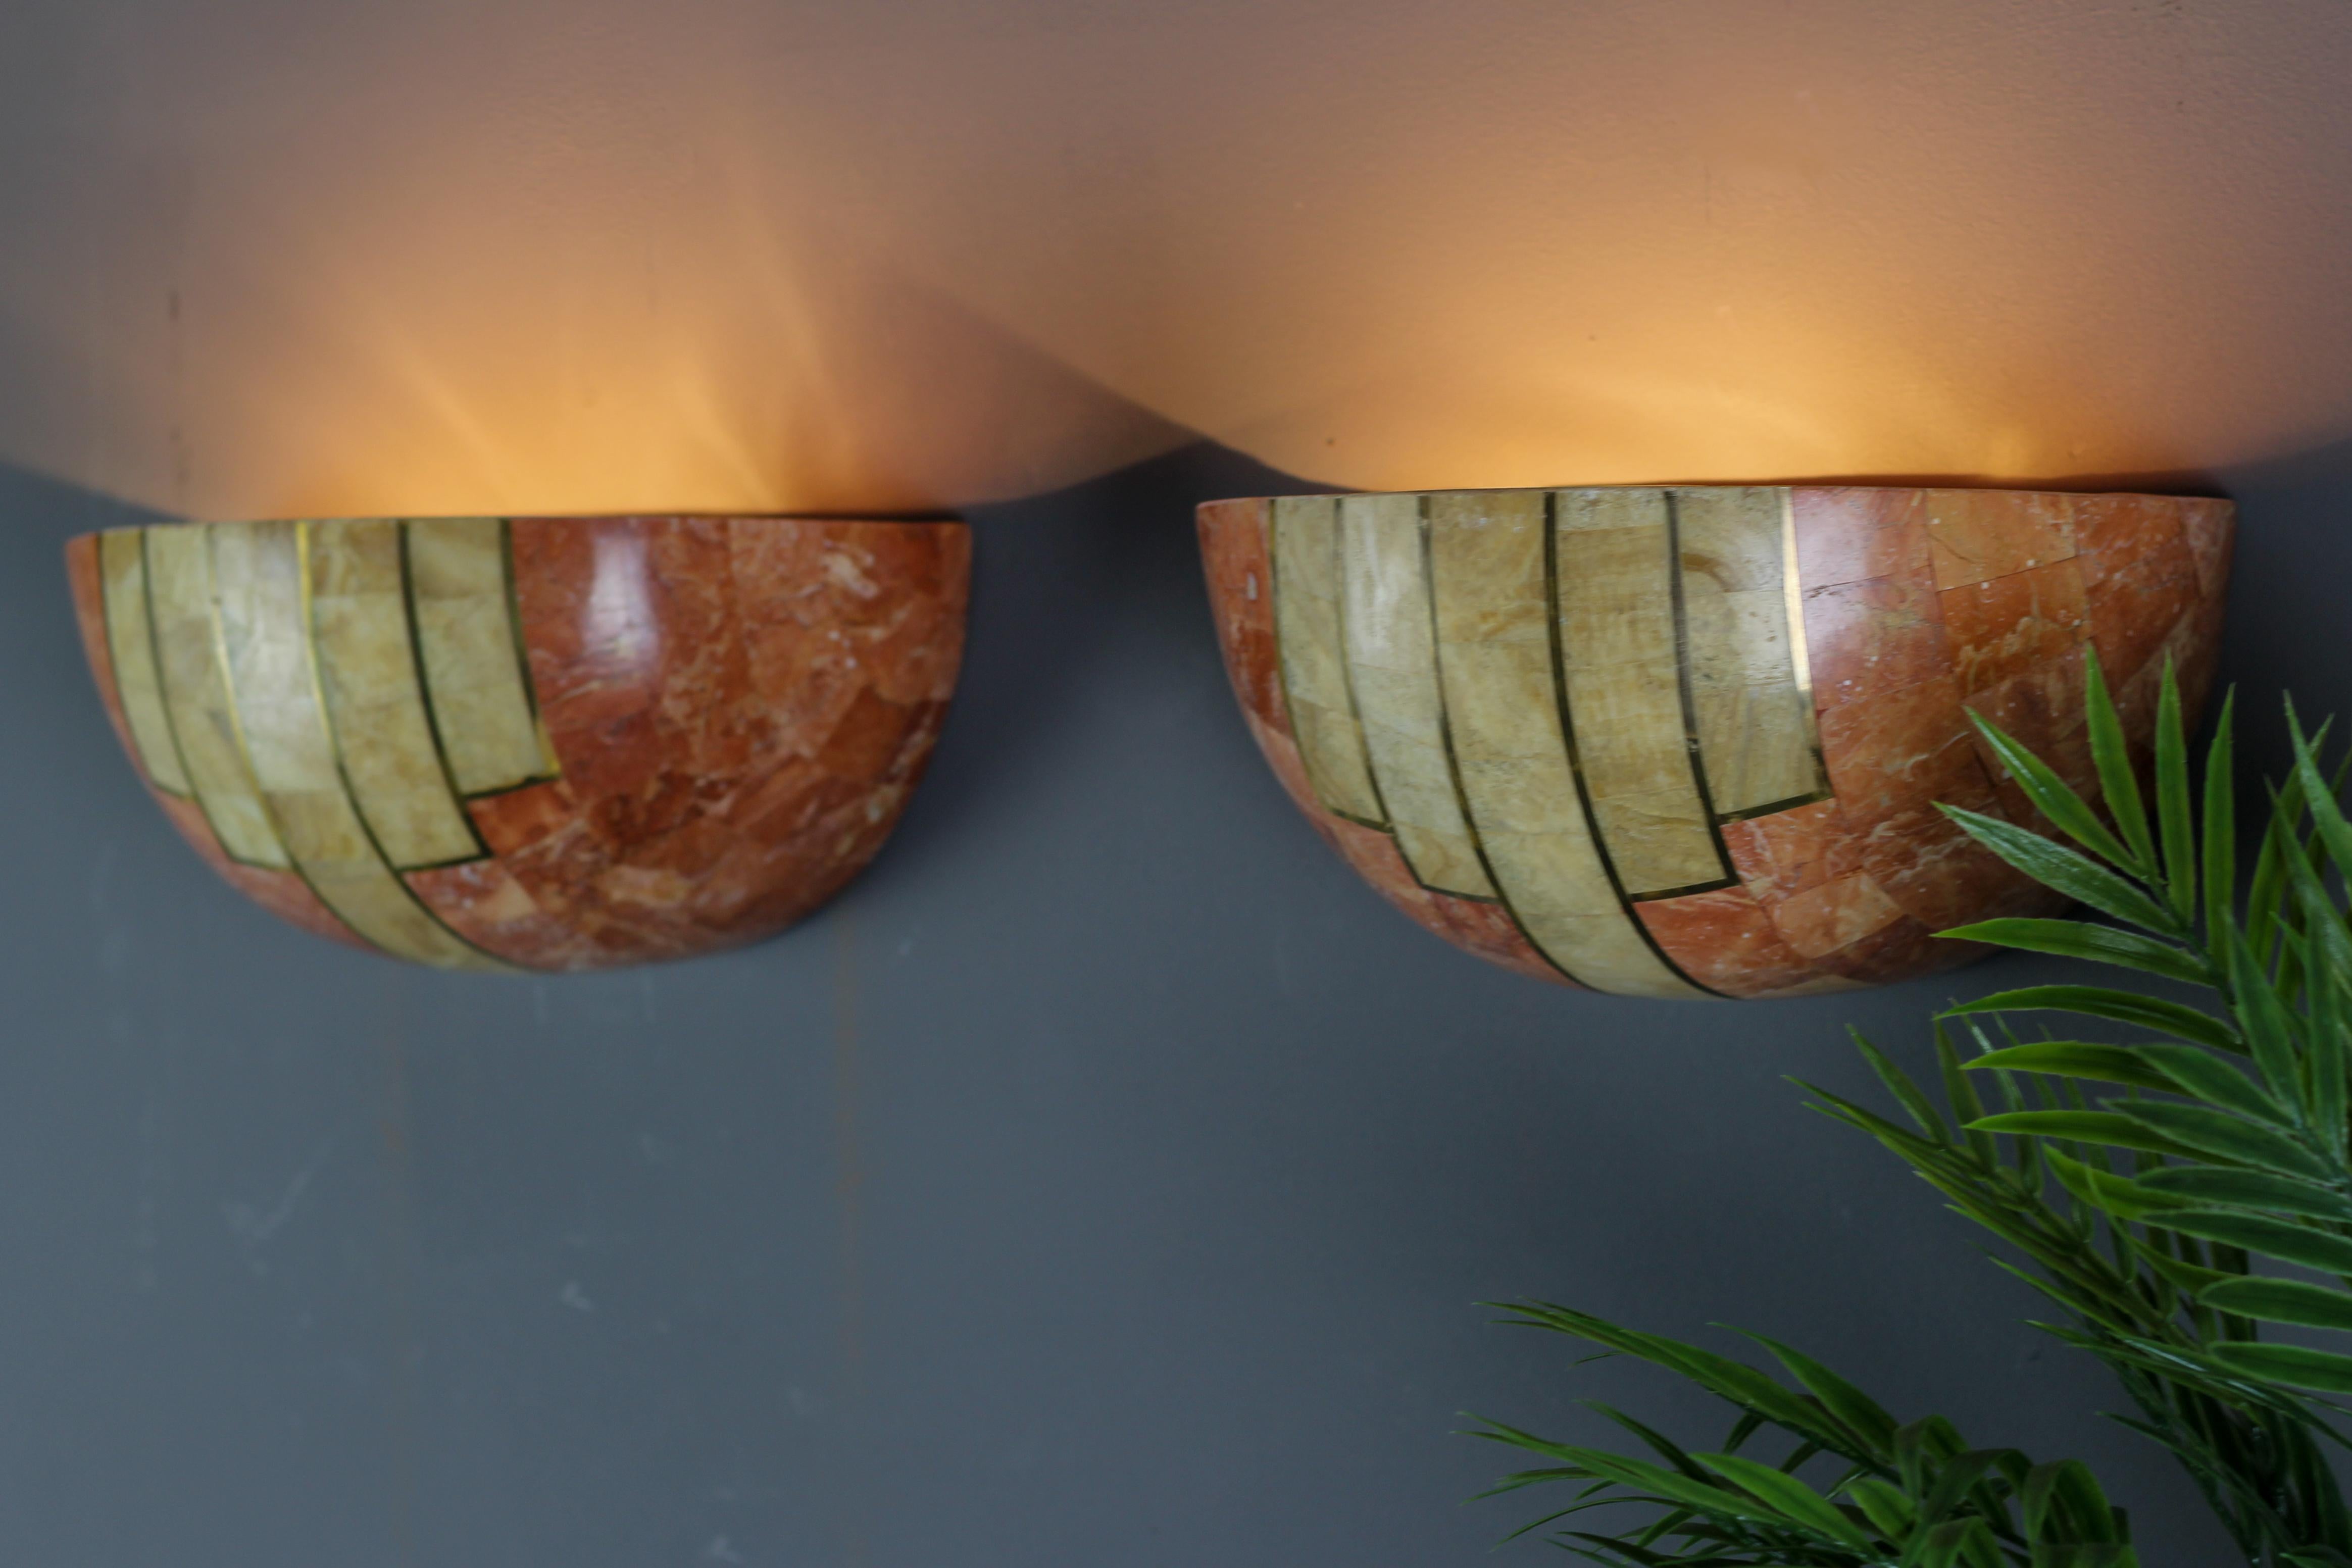 Gorgeous pair of demilune or half-moon sconces by Louis Drimmer Rodez made of terracotta with marble top layer and brass line finishing. France, the 1970s - 1980s.
Each wall sconce has one socket for an E 27 (E 26) size light bulb.
Dimensions: